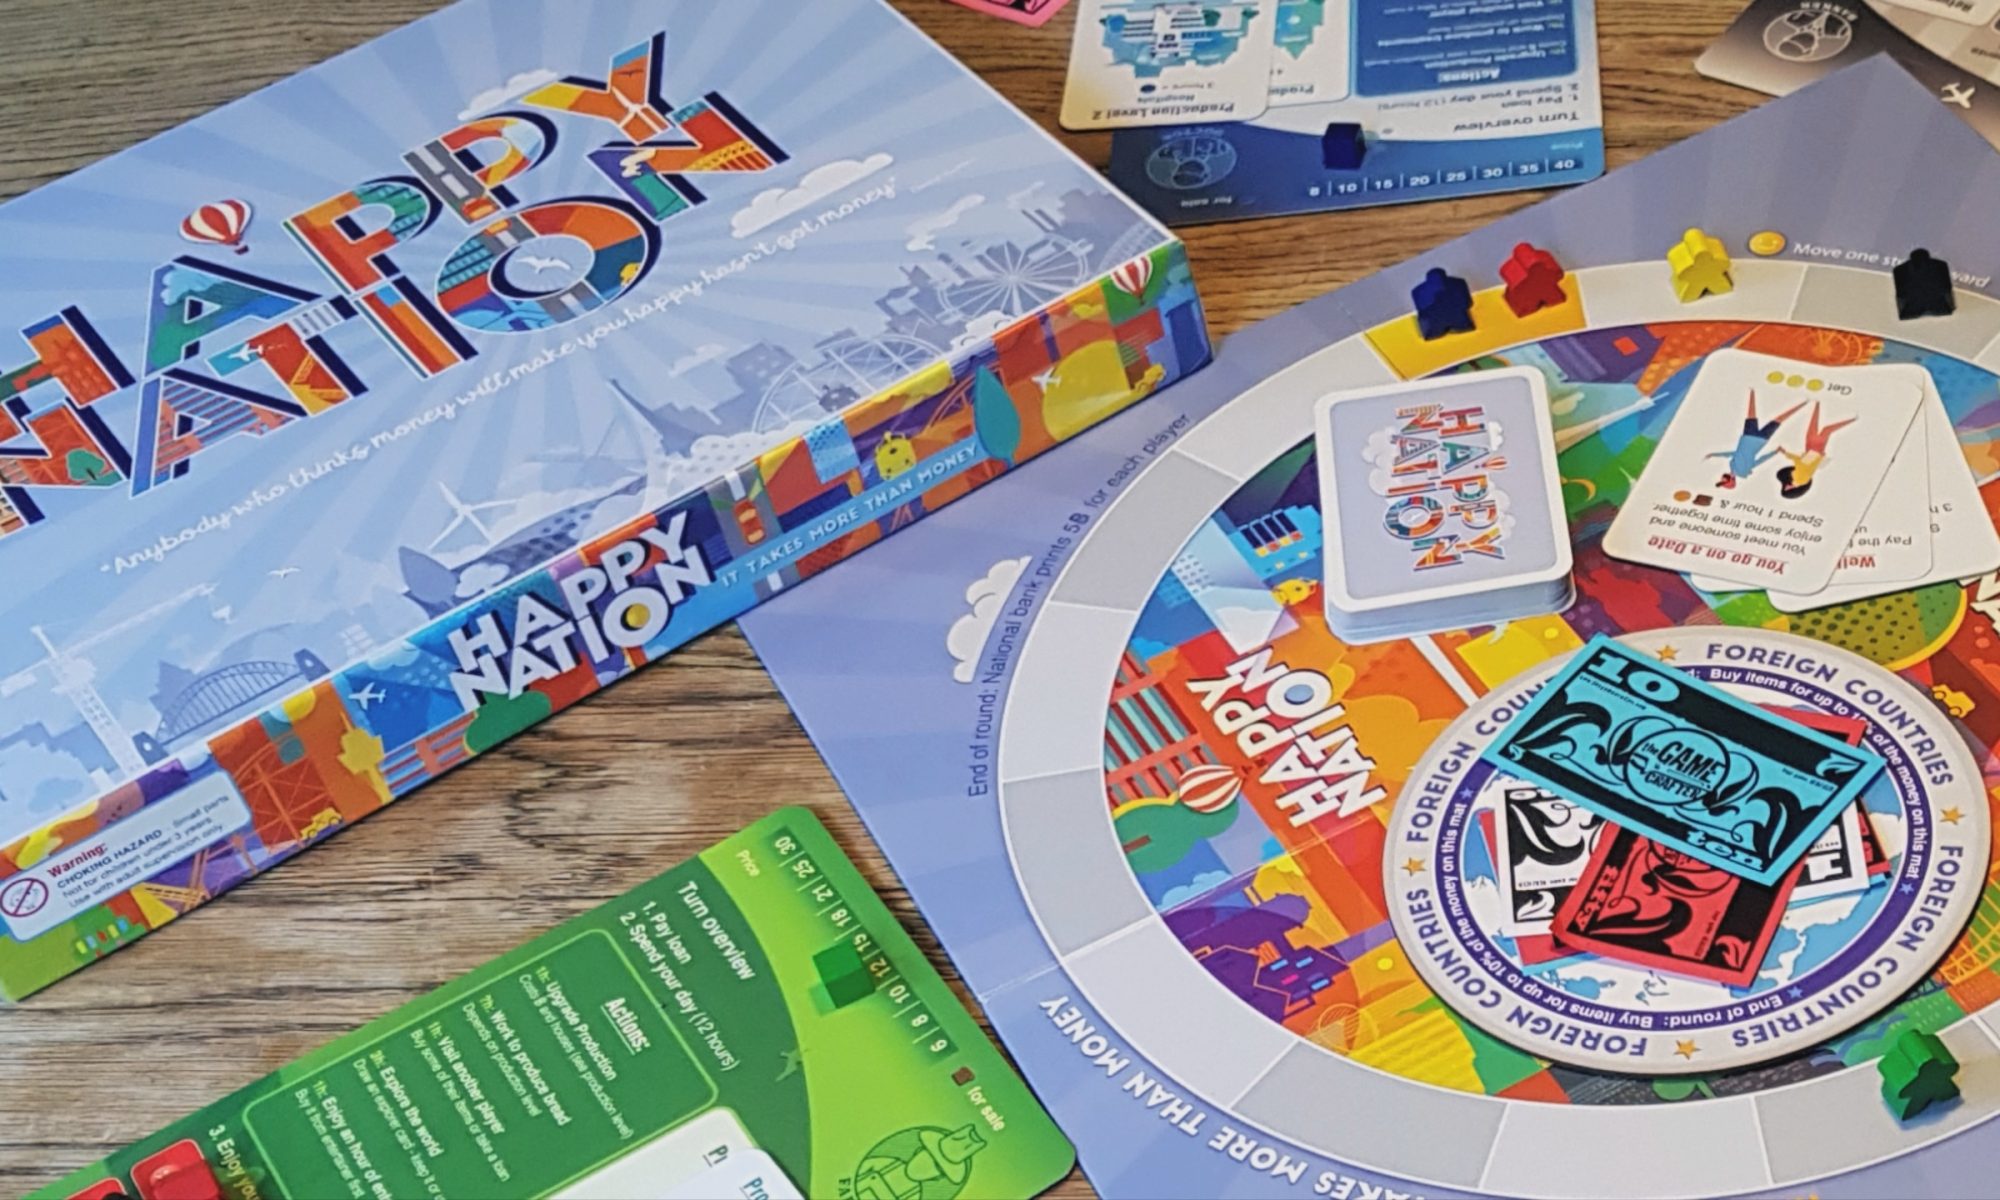 Happy Nation - The Board Game